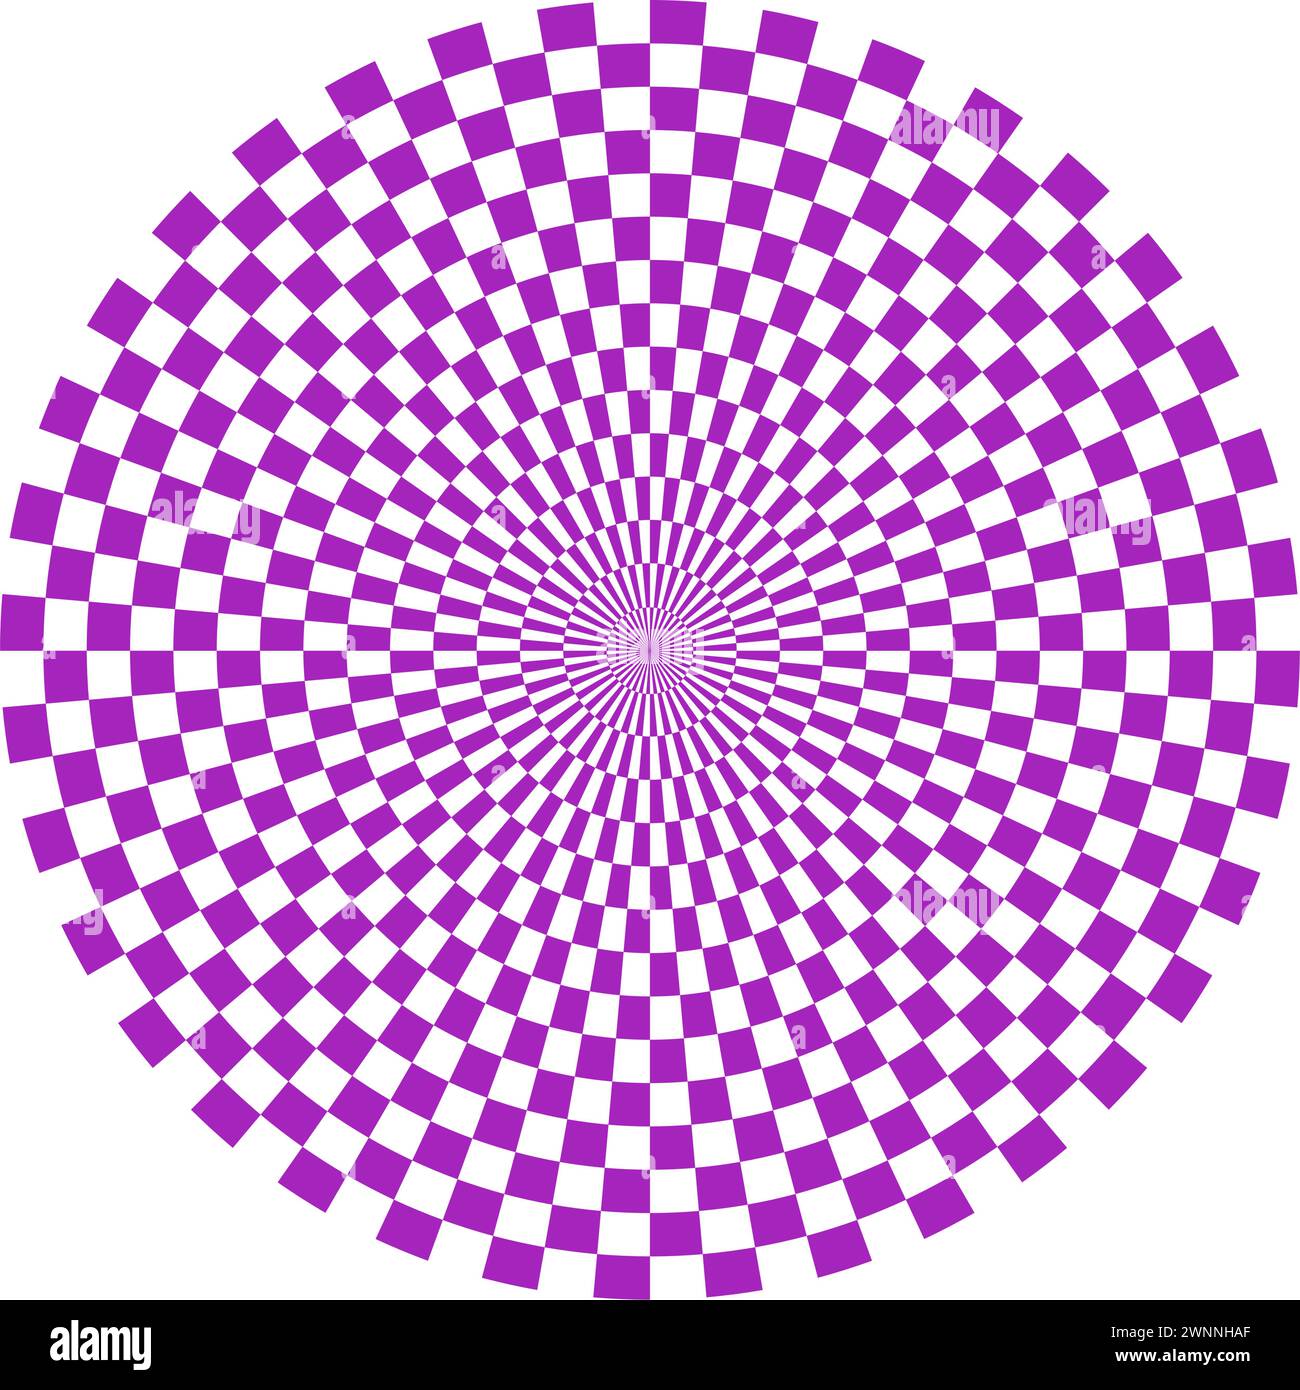 Checkered circle background. Psychedelic circle with checkerboard geometric pattern. Optical chess round background with radiating lines and squares Stock Vector